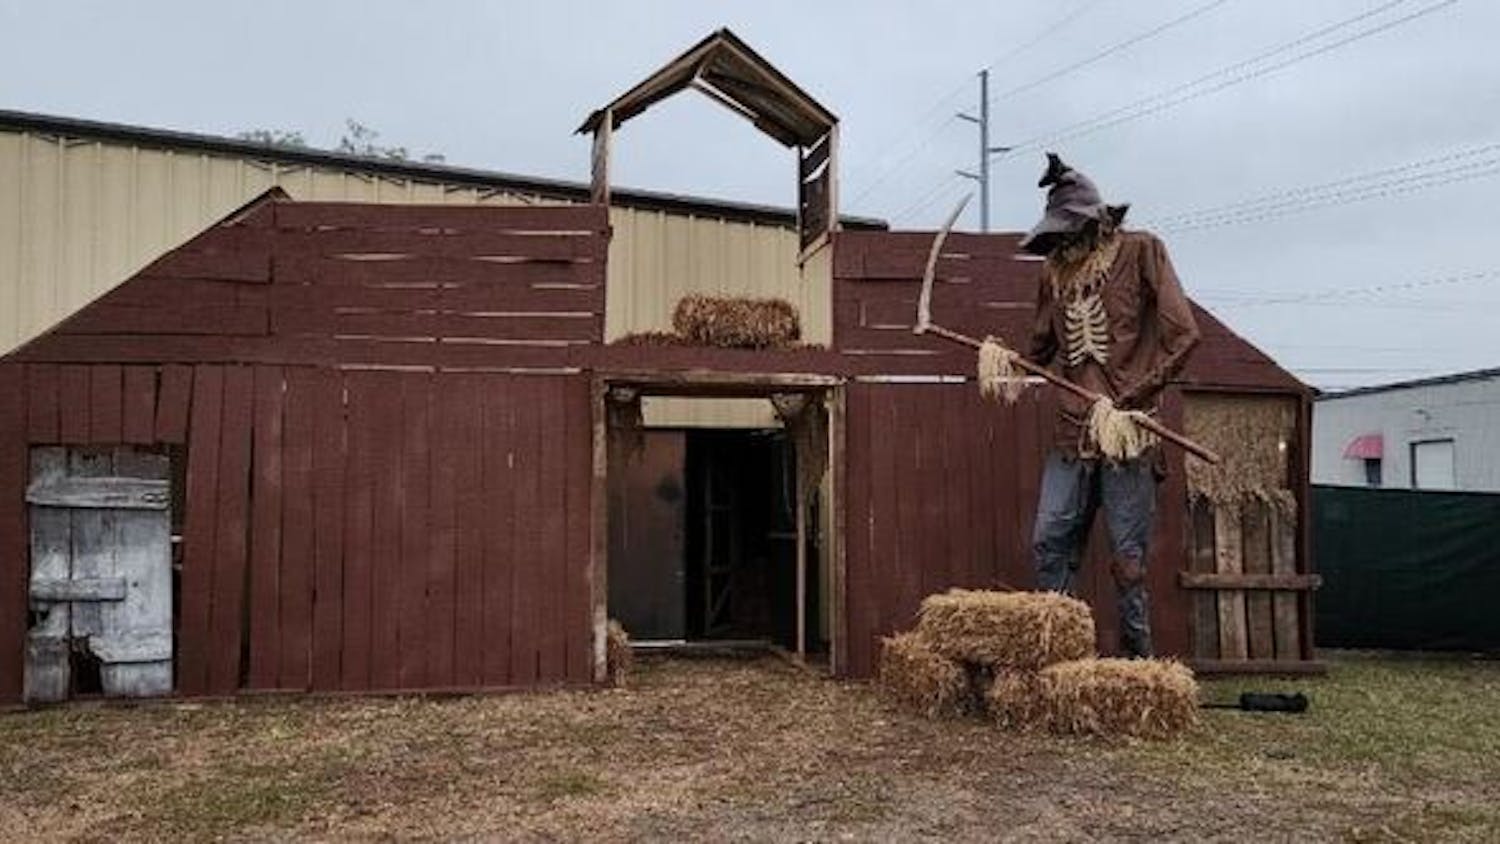 A large, scythe-wielding scarecrow towers over the entrance of the Hall of Horrors attraction in Cayce, South Carolina, throughout October 2023. A portion of the proceeds raised at the attraction goes to Camp Hope, a summer camp for people with cognitive disabilities.